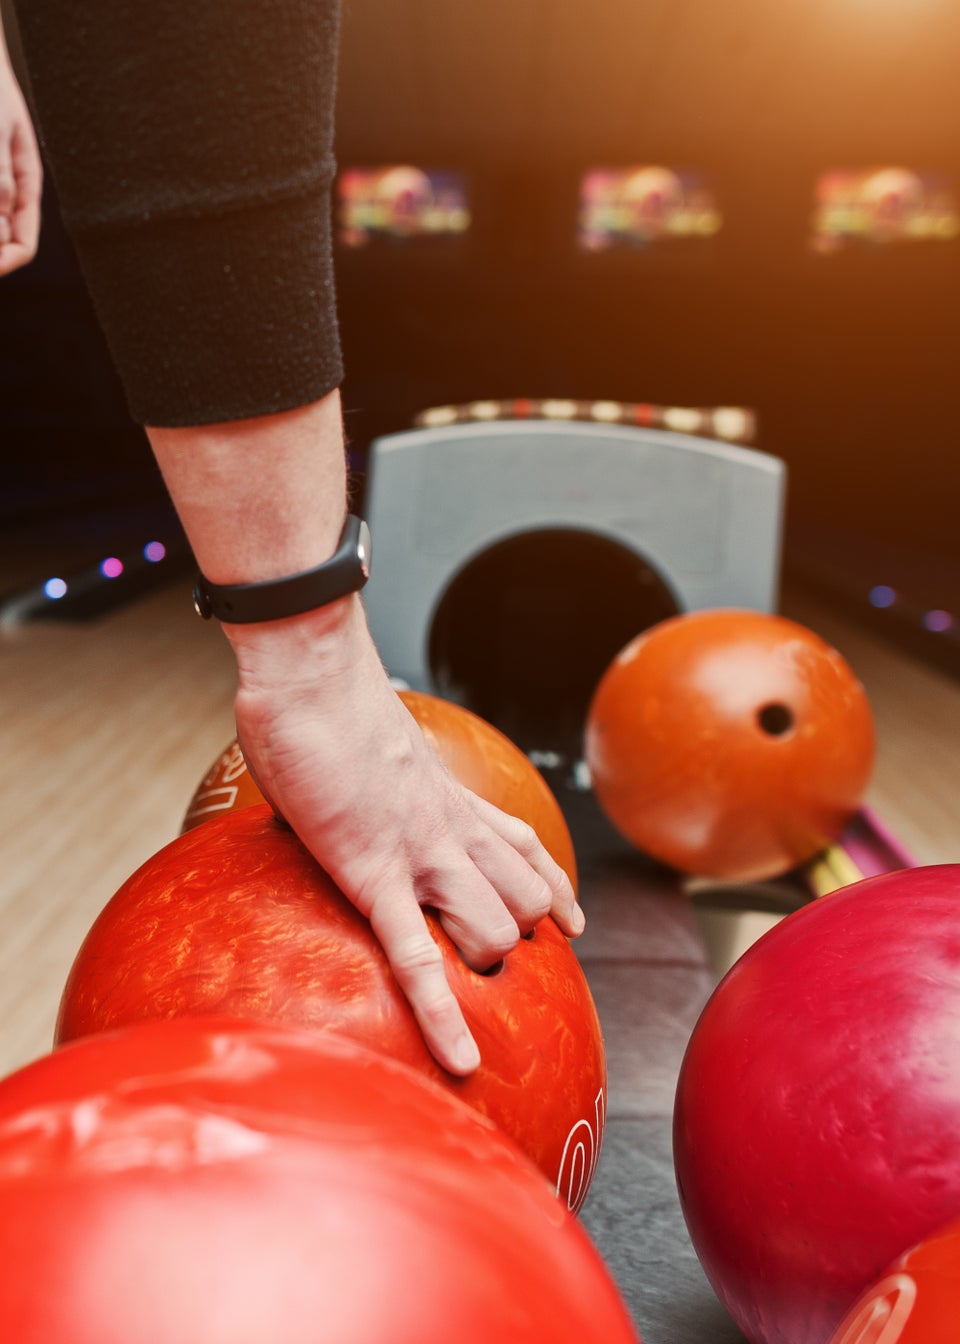 Virgin Experience Days Two Games of Bowling with Meal and Drinks for Two at Disco Bowl